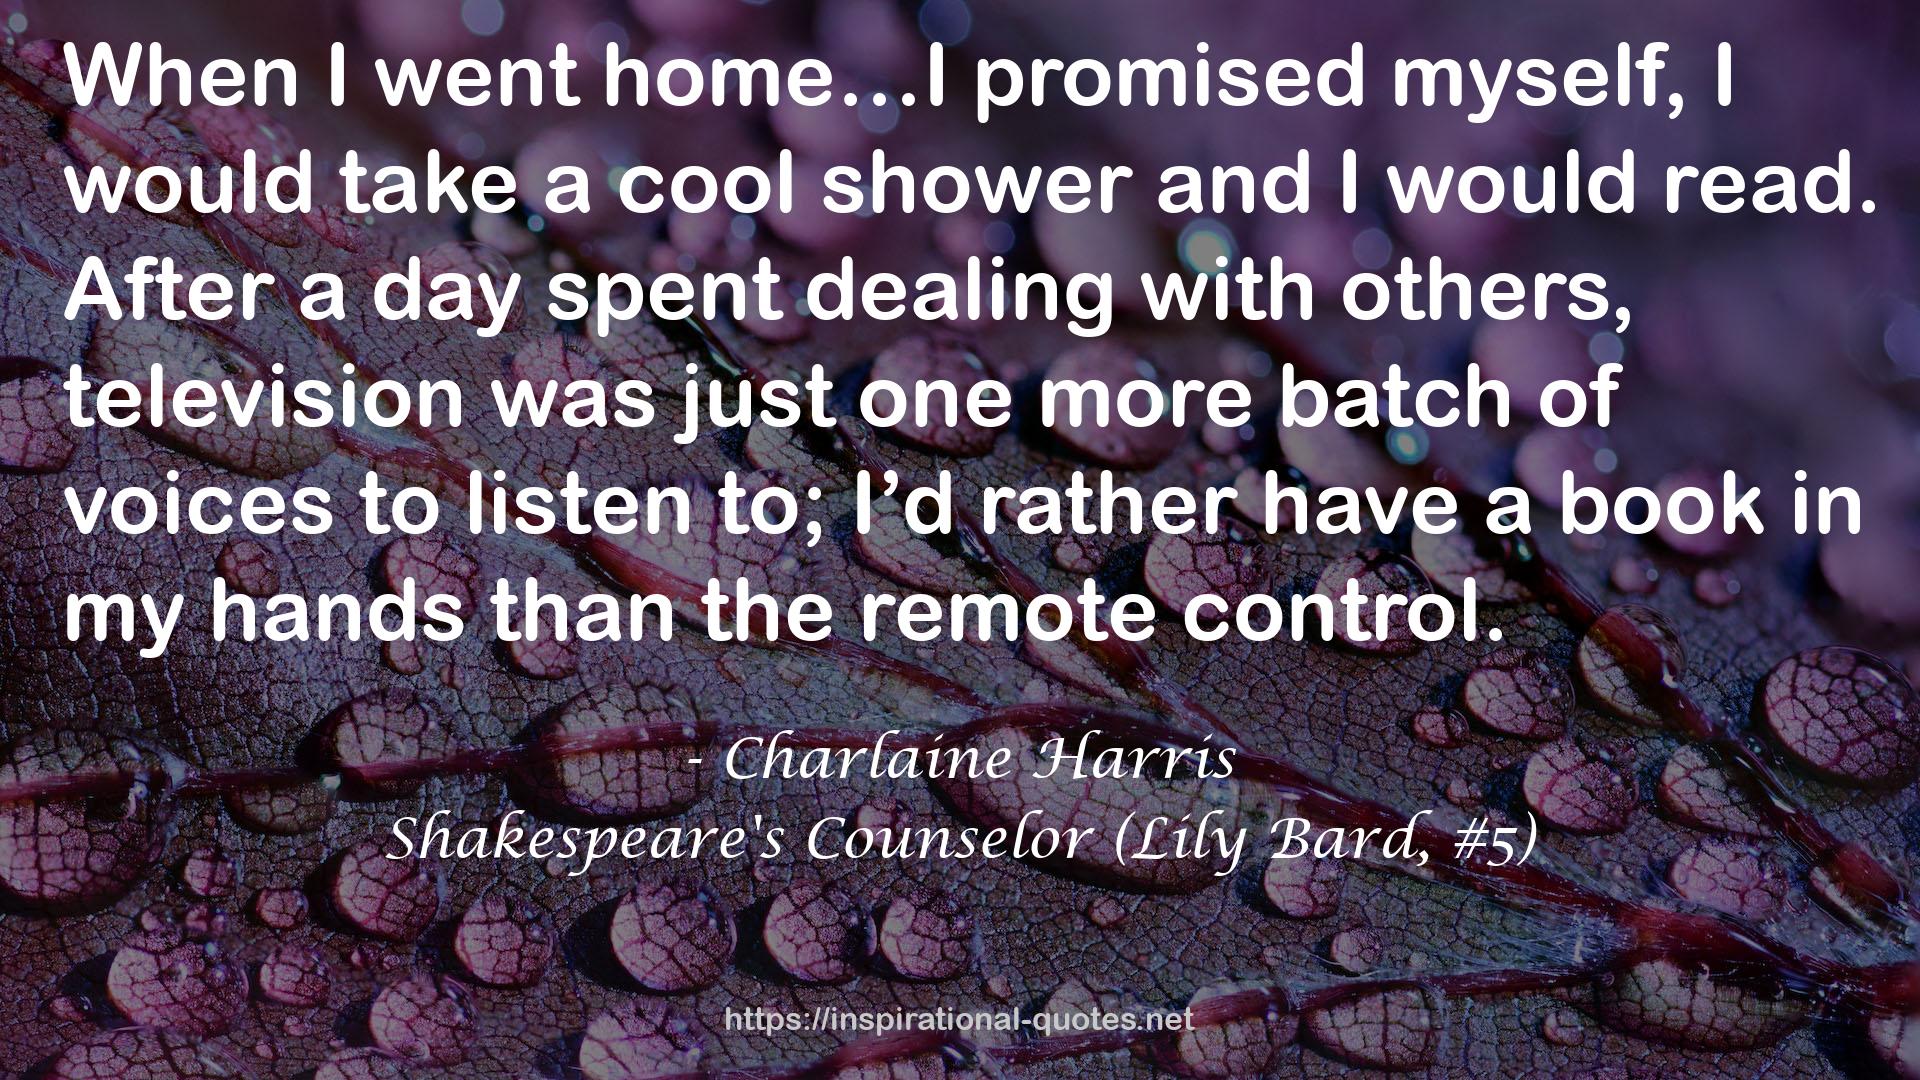 Shakespeare's Counselor (Lily Bard, #5) QUOTES